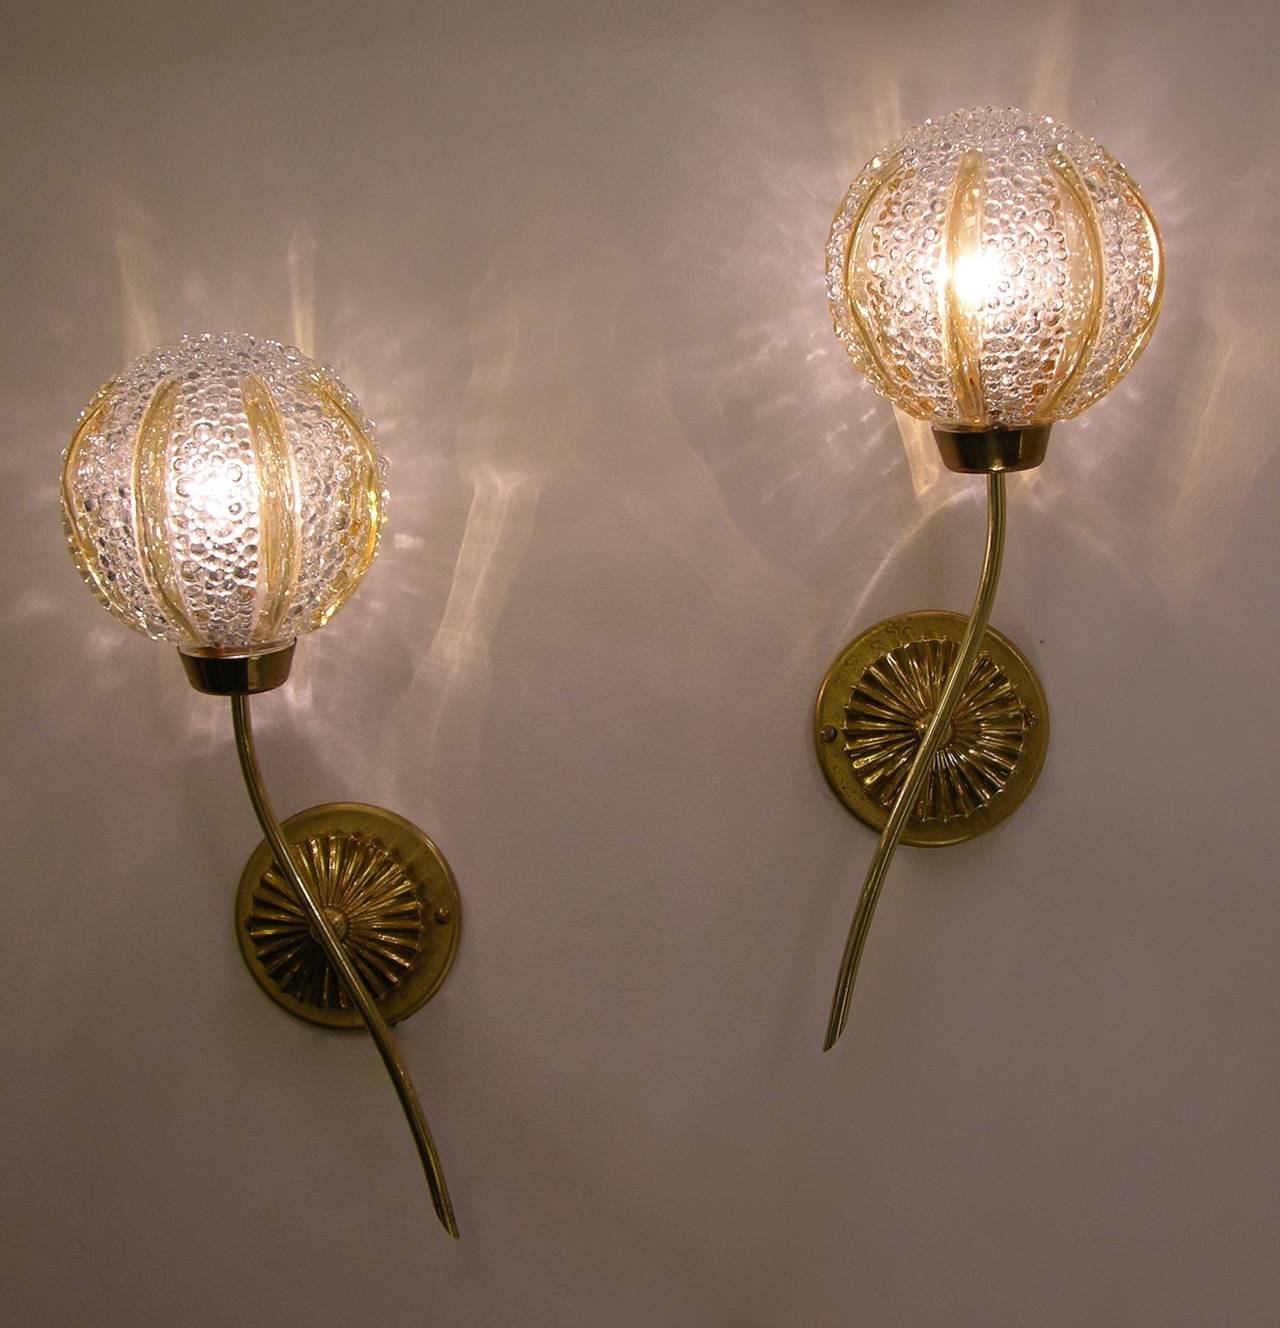 Hand-Crafted Barovier 1950s Delightful Pair of Textured Murano Glass Sconces